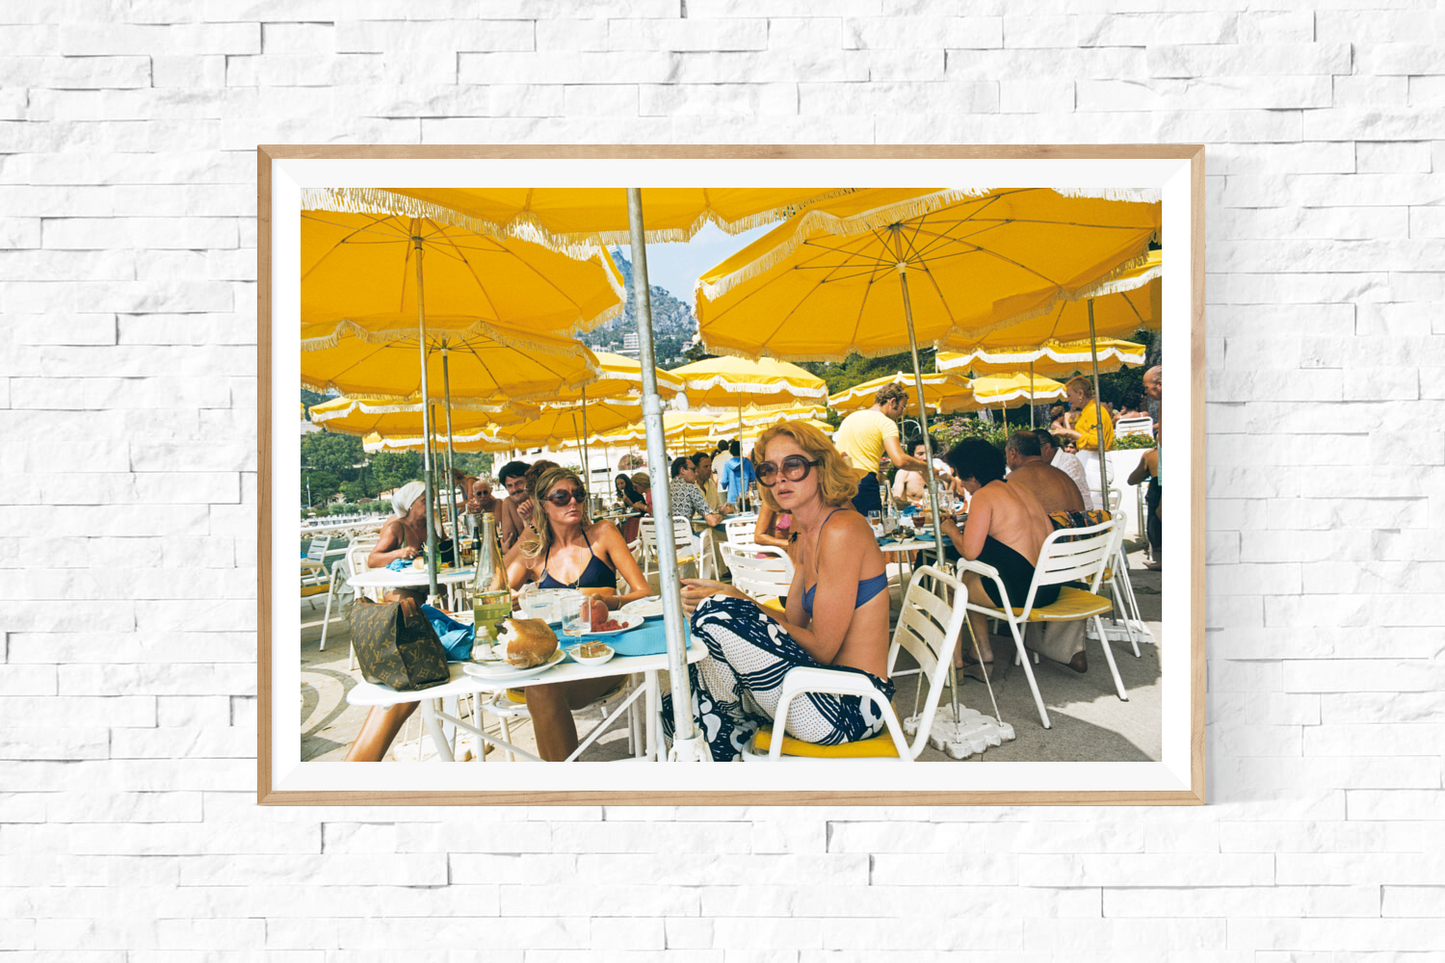 Framed Slim Aarons: Cafe in Monte Carlo photo for sale Getty Images Gallery